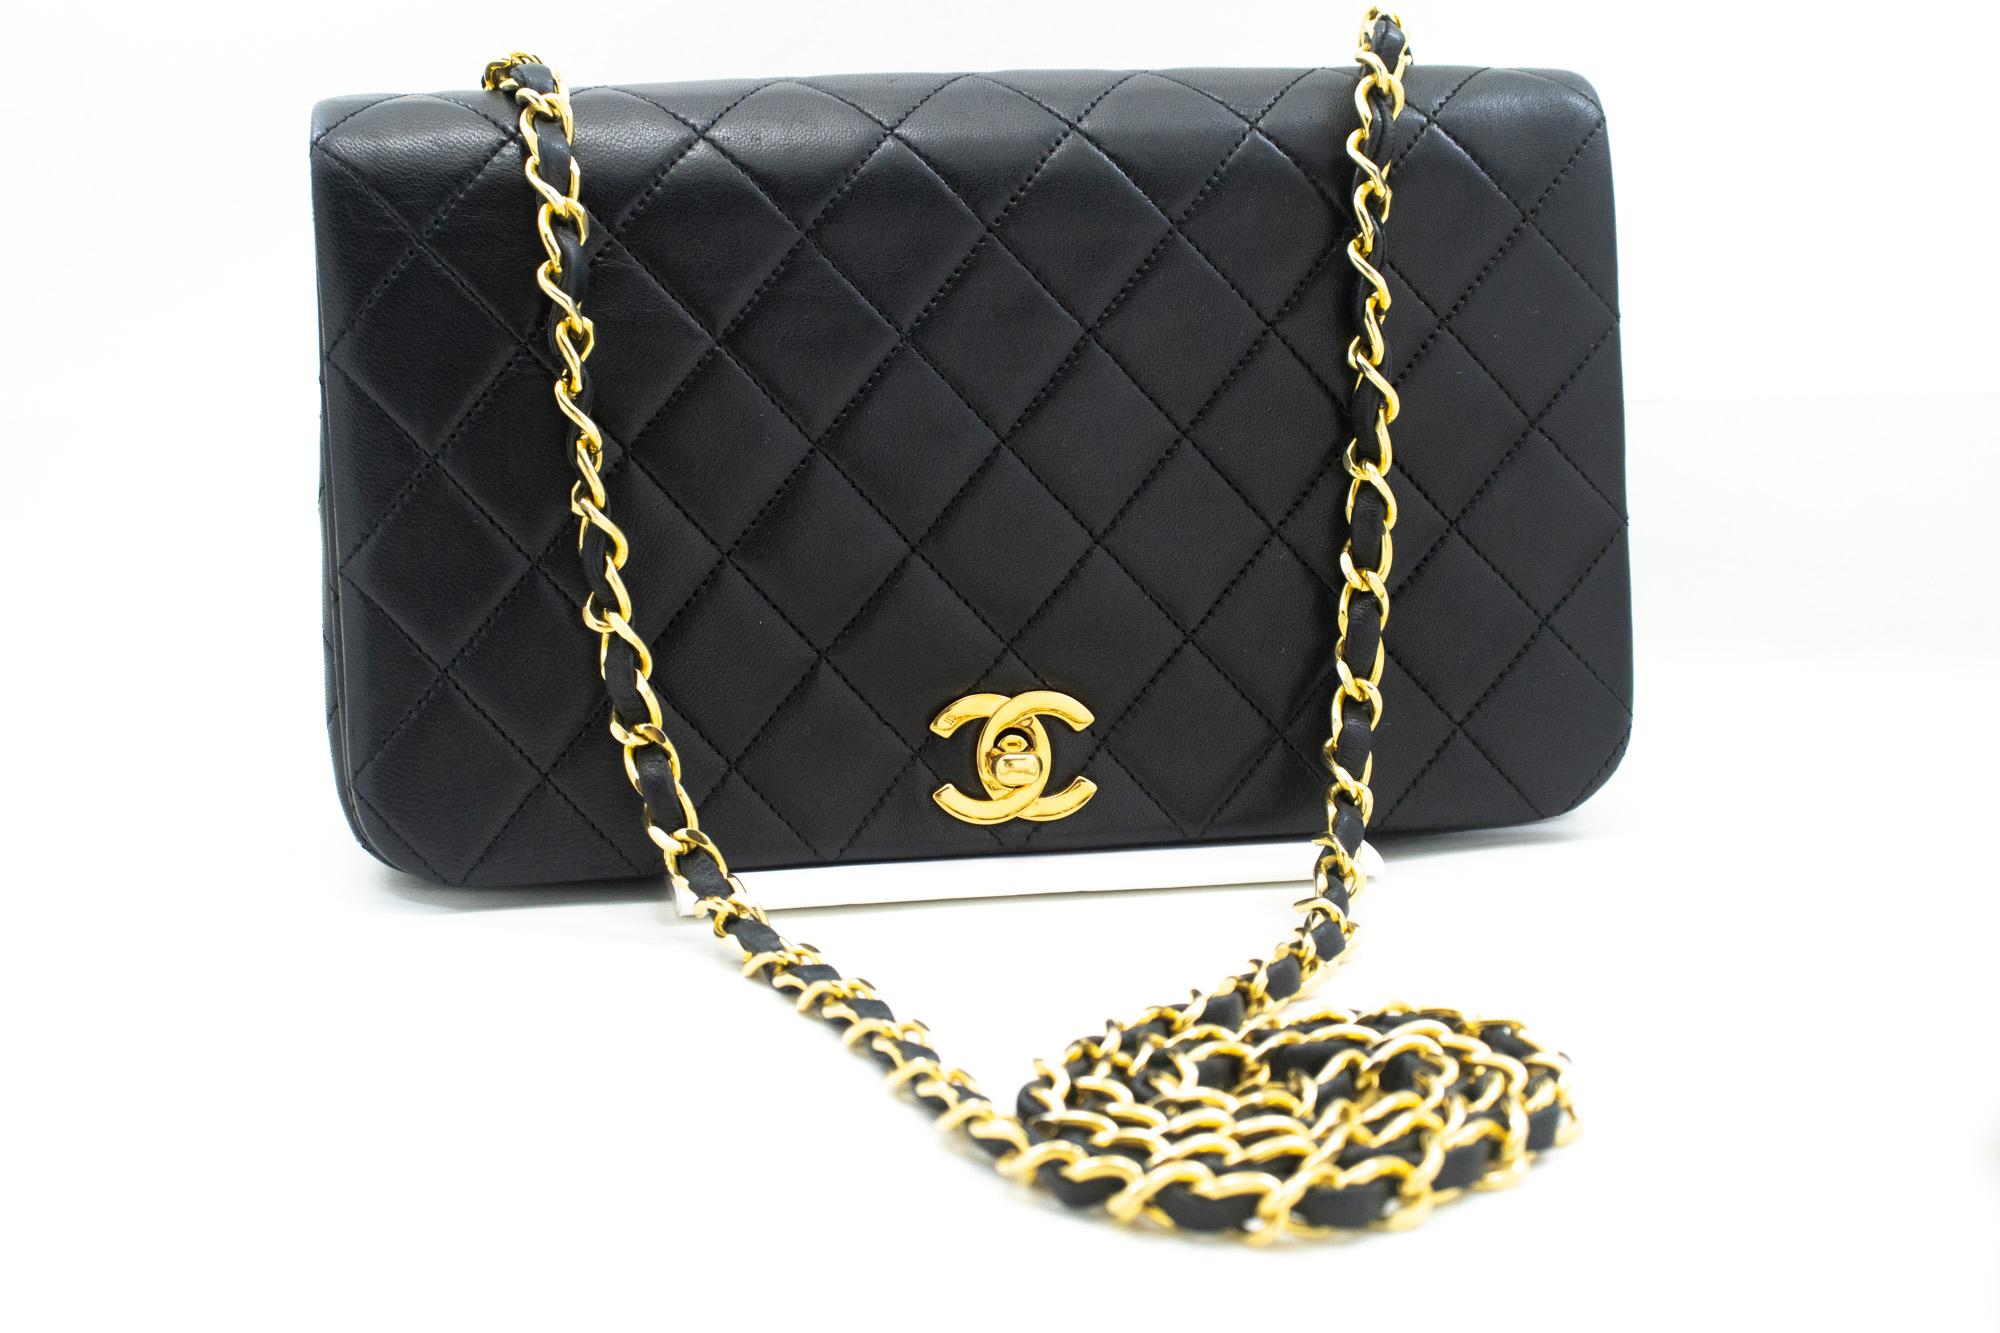 An authentic CHANEL Full Flap Chain Shoulder Bag Crossbody Black Quilted Lamb. The color is Black. The outside material is Leather. The pattern is Solid. This item is Vintage / Classic. The year of manufacture would be 1989-1991.
Conditions &